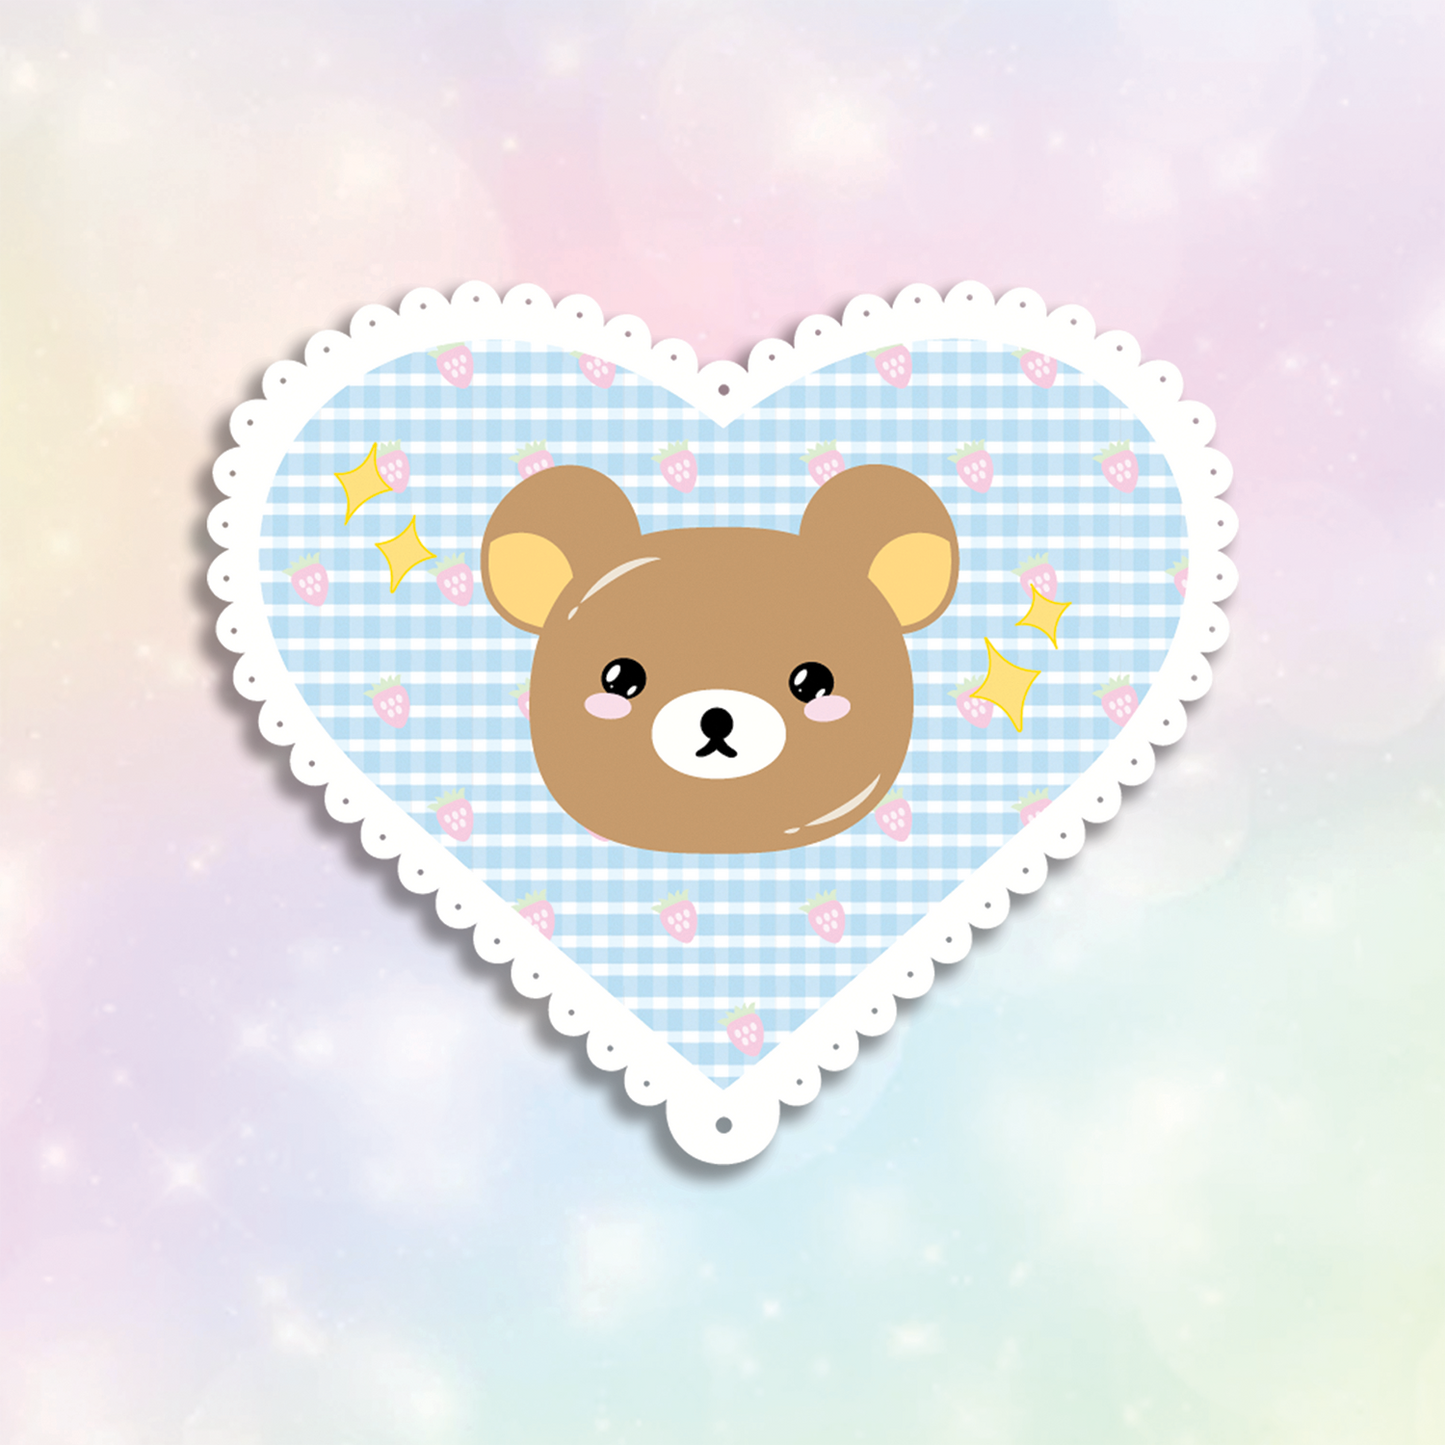 Brown Bear Sticker design is a brown bear inside a blue lace-scalloped heart with yellow sparkles.